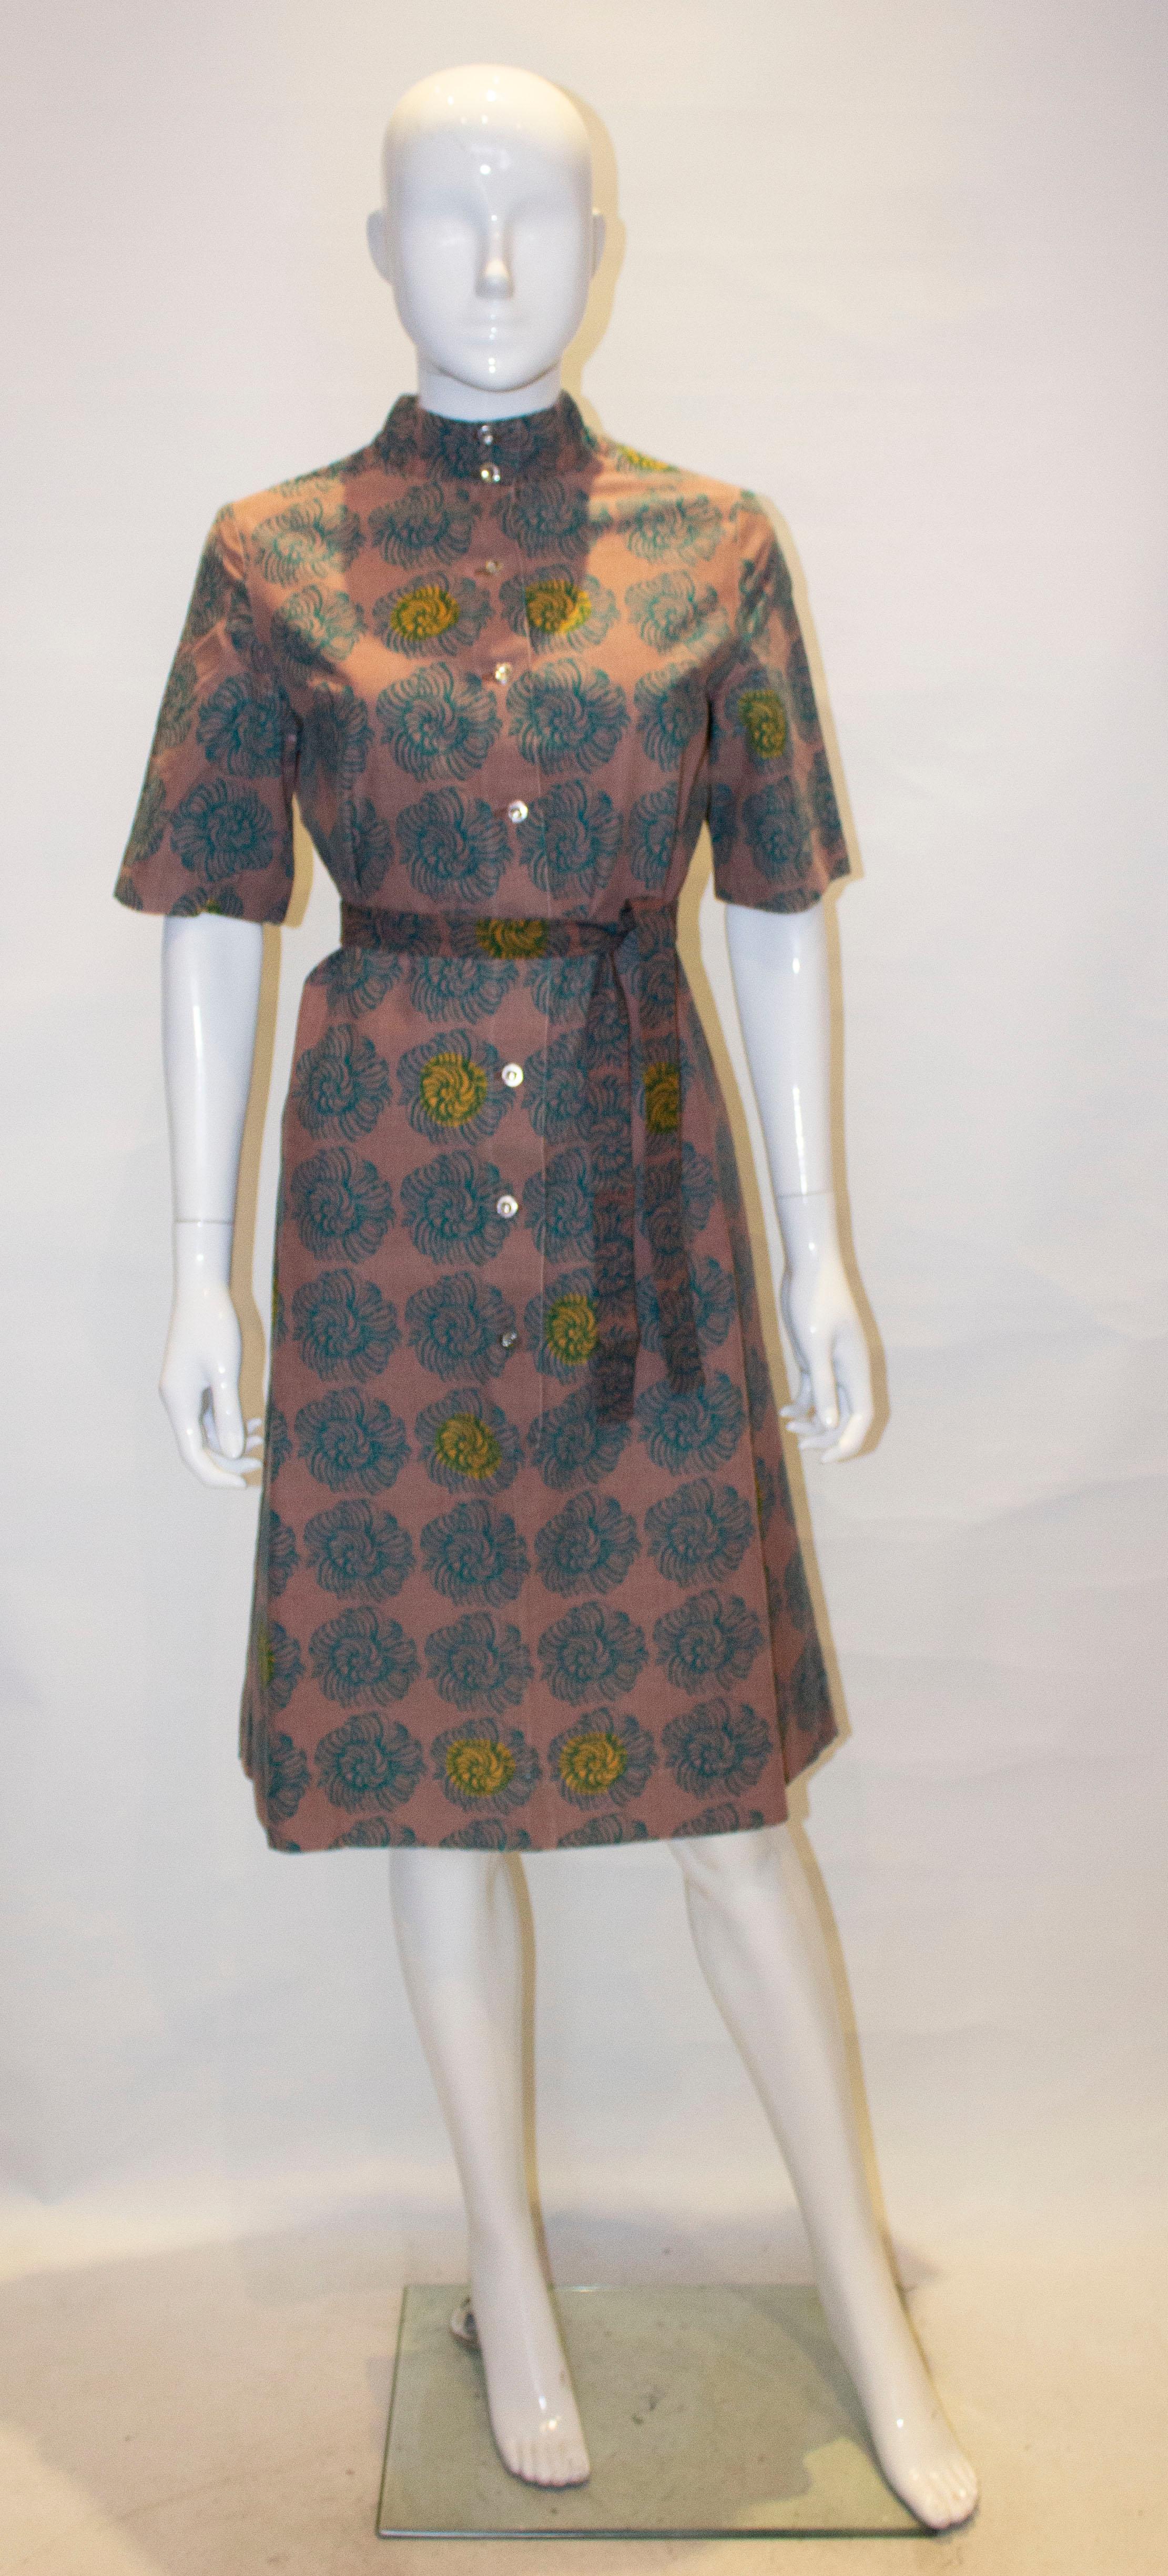 A great cotton dress by Maremeko of Finland from 1963. The dress has a light brown background, with a green and yellow print. It has short sleaves with a button front opening and self fabric tie belt. 